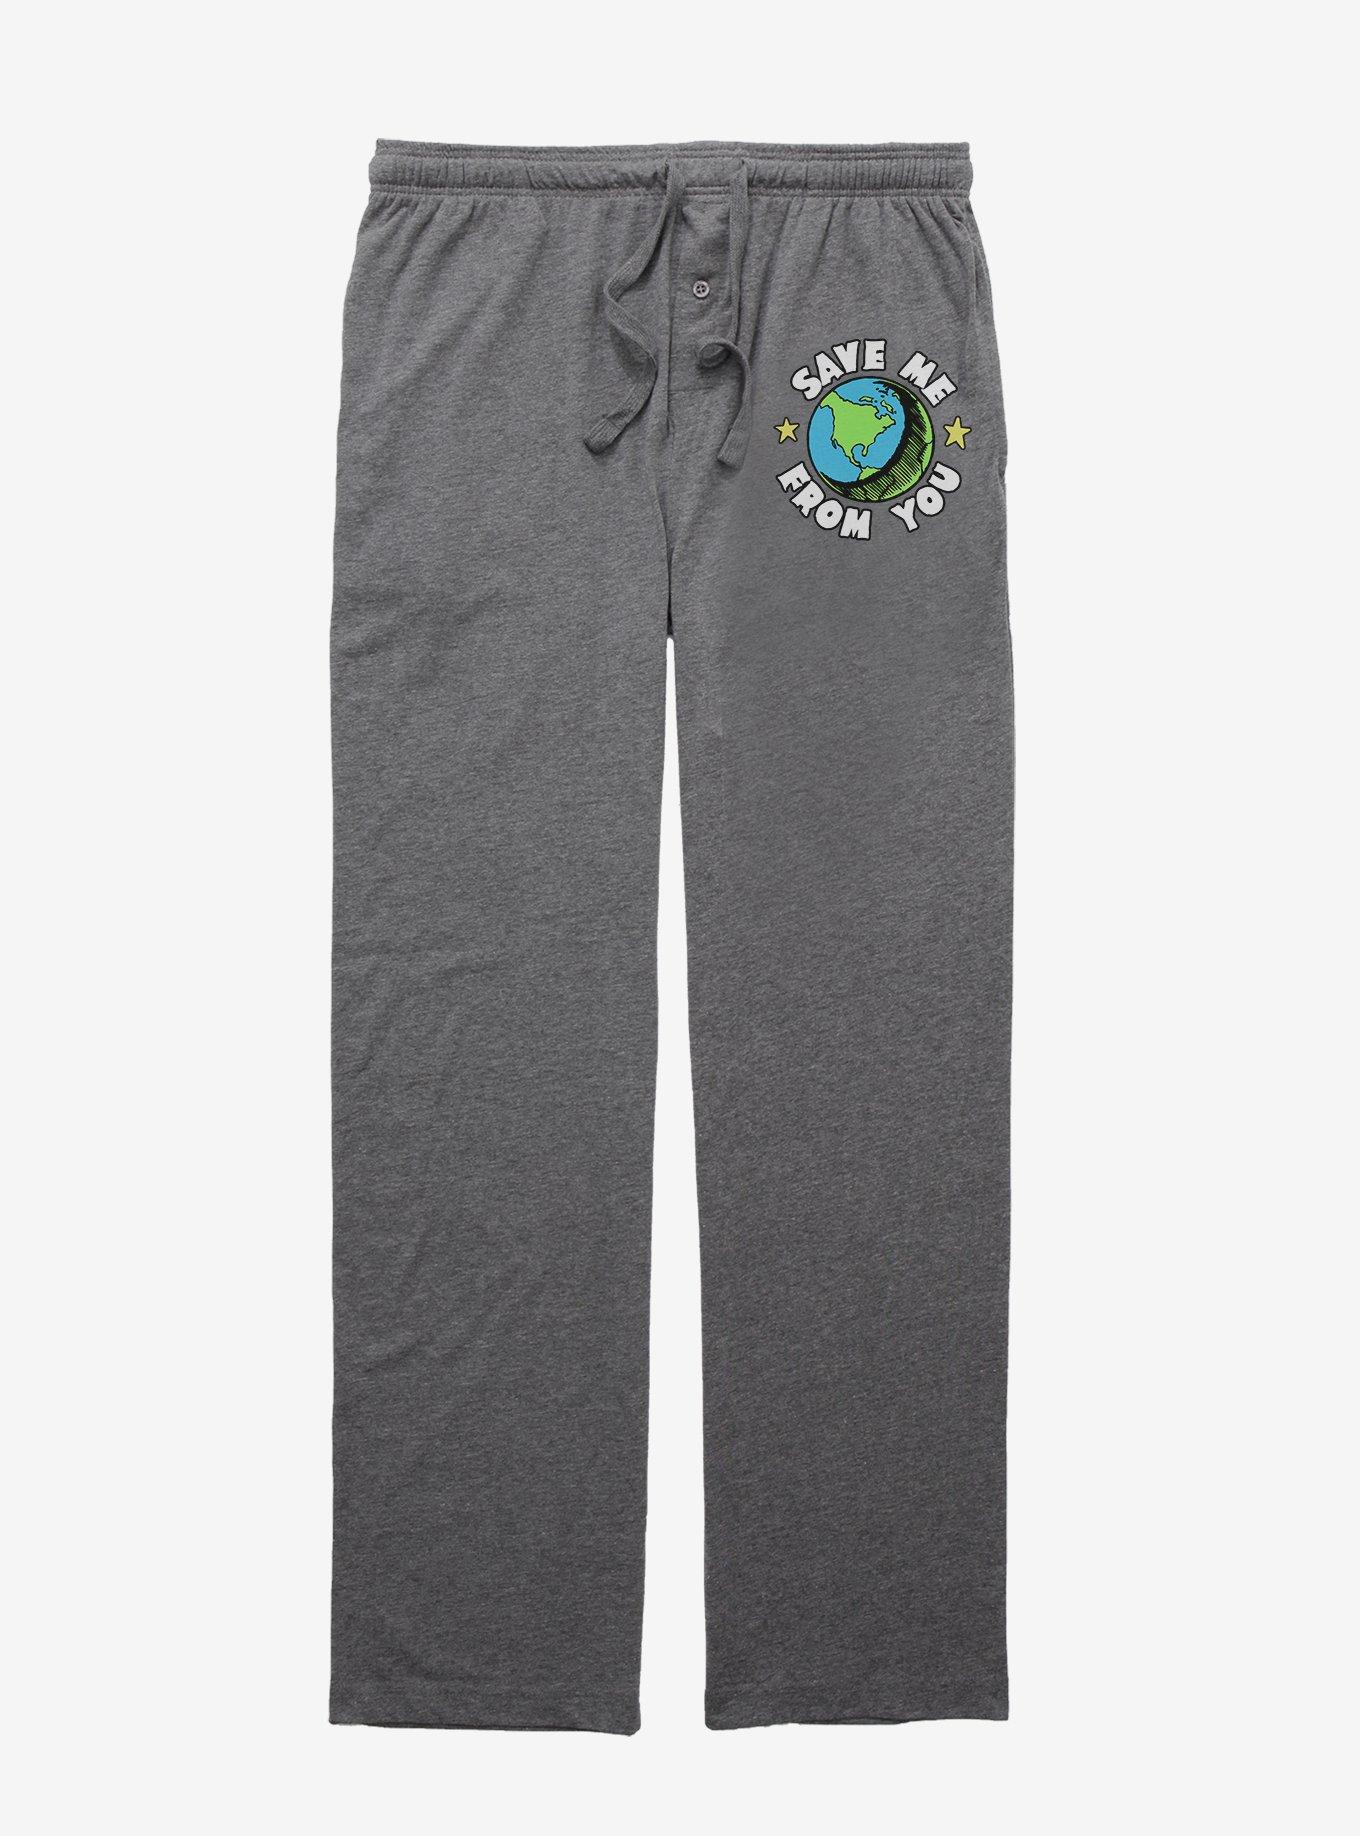 Cozy Collection Save The Earth Pajama Pants, GRAPHITE HEATHER, hi-res